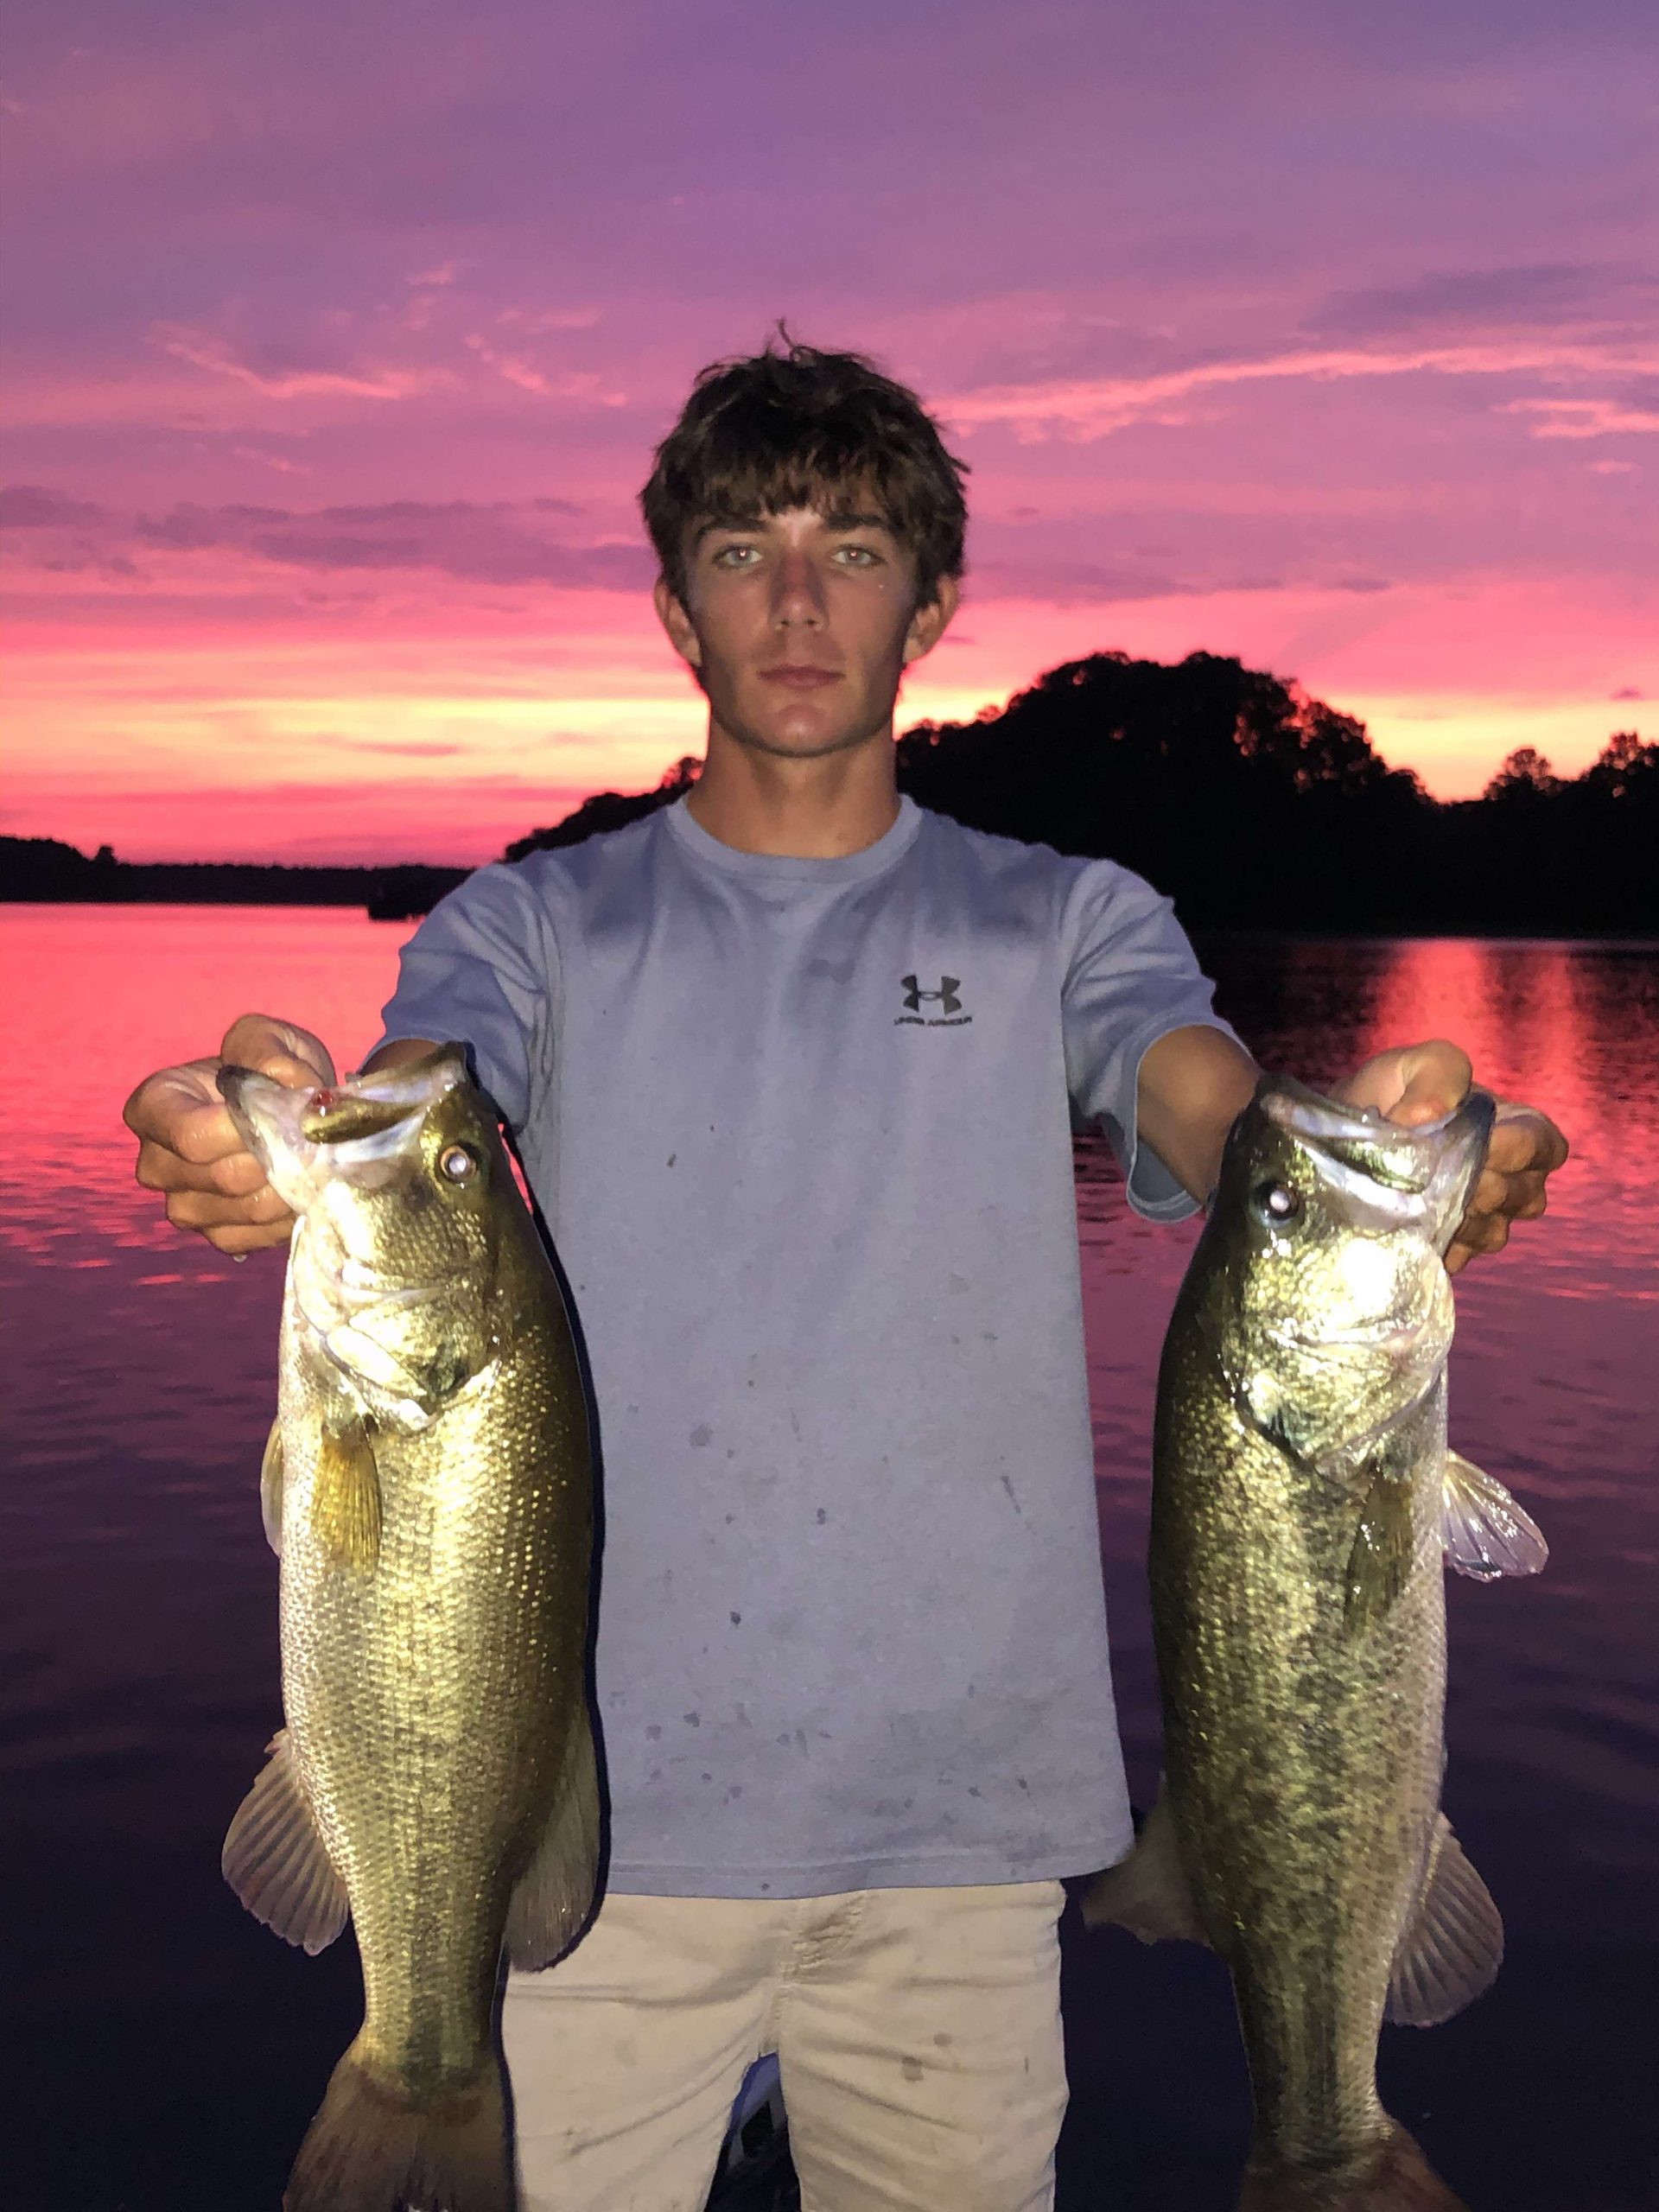 <p><strong>Turner Hart, Ashland, Va.</strong></p><p>Patrick Henry High School senior, Turner Hart, captured two tournament wins as well as eight Top 5 finishes and two Top 20s. As a junior he earned a spot in the 2020 Bassmaster High School National Championship in Tennessee. He is currently confirmed as a pro angler in the upcoming Basspro.com Bassmaster Northern Open on the James River in mid-May. Prior to his sophomore year, Hart worked with the B.A.S.S. Nation of Virginia State Youth Director Jack Babcock to establish a high school fishing team since his school did not have one. âTurner adapts to the situations that are presented to him with an open mind, calm temperament and professional manner,â says Babcock. âTurner is a wonderful young man with the courage, strength and ability to pursue his education and professional career goals.â In his sophomore and junior year, Hartâs team finished 5th and 2nd respectively in the Virginia B.A.S.S. Nation High School State Championship. Alongside fishing tournaments, Hart participates in cleanup activities along the Chickahominy and James River. He does so while maintaining a 3.9 GPA and playing as midfielder on the Patrick Henry High School Varsity Soccer team, where as a sophomore he was named leading scorer and offensive MVP.</p>